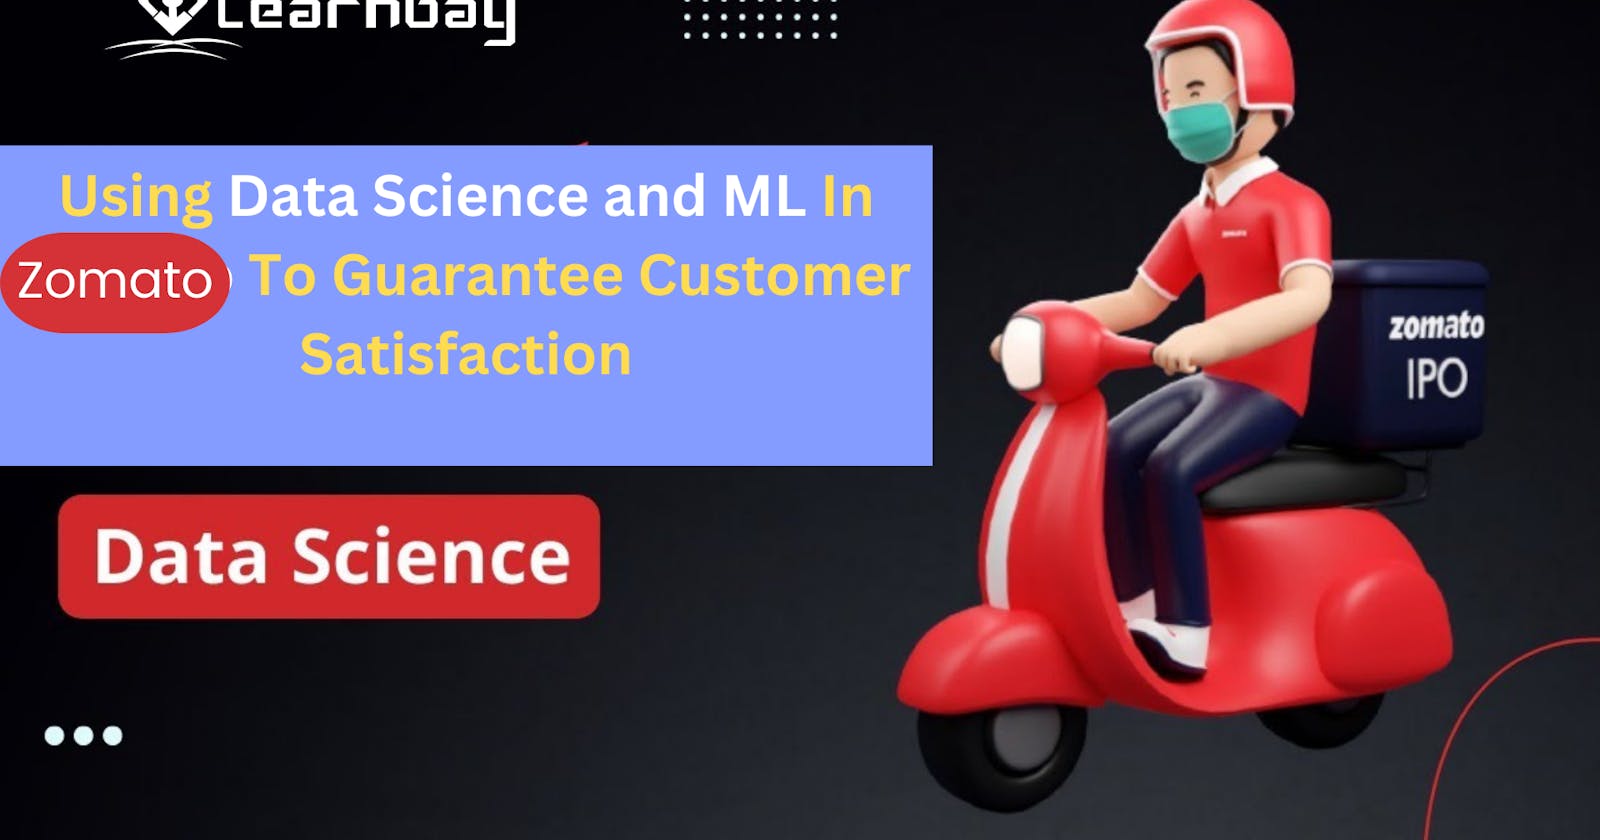 Using Data Science and ML In Zomato To Guarantee Customer Satisfaction